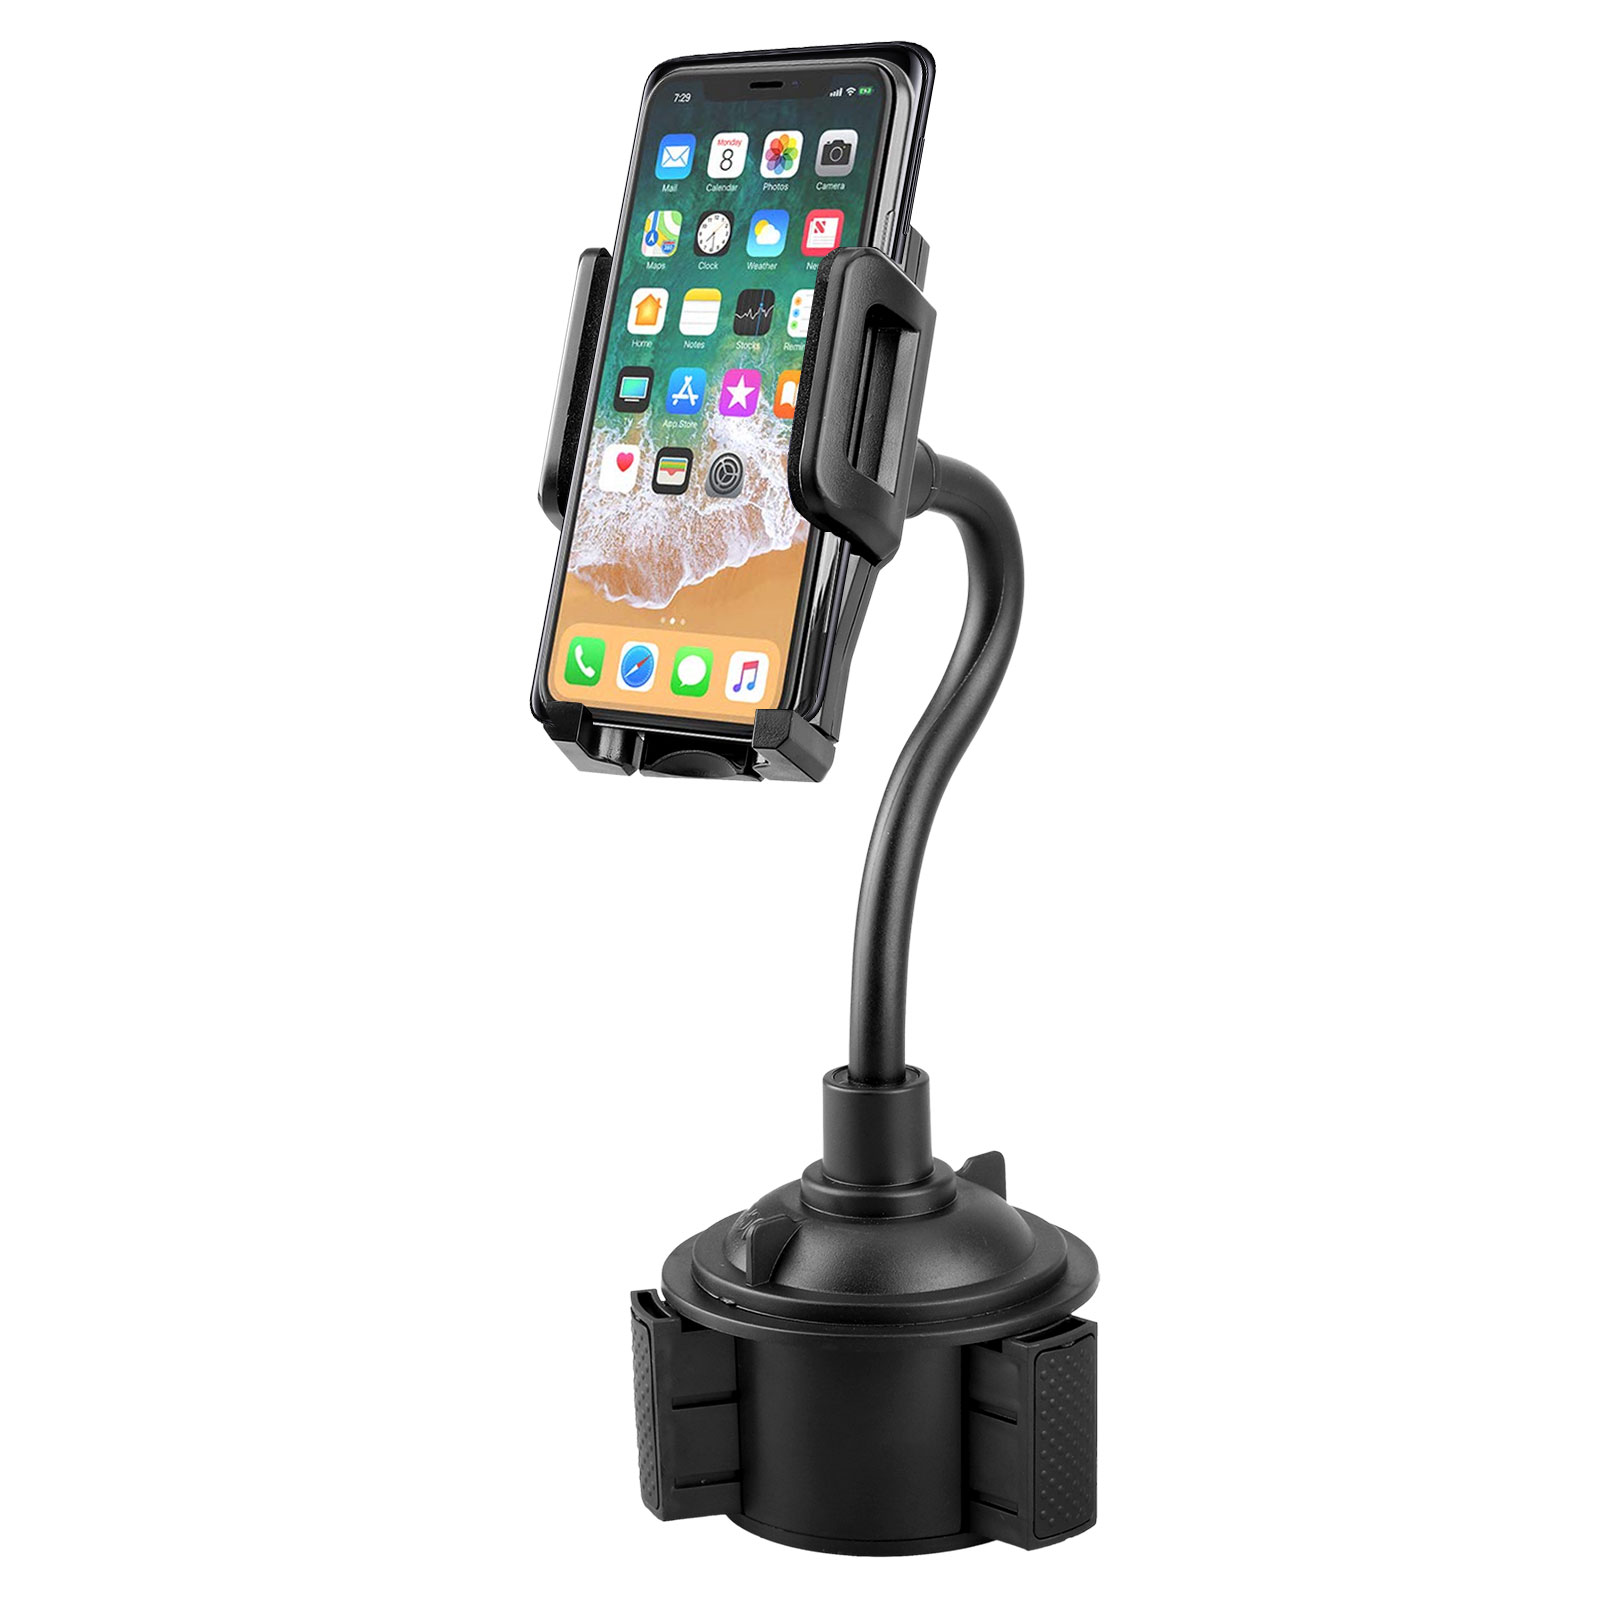 Car Phone Mount, EEEkit Universal Cell Phone Holder, Car Cup Holder Mount Fit for iPhone 13 12 Pro Max 11 Xs Max R X 8 Plus, Samsung Galaxy S21 S20 S10 and More - image 1 of 11